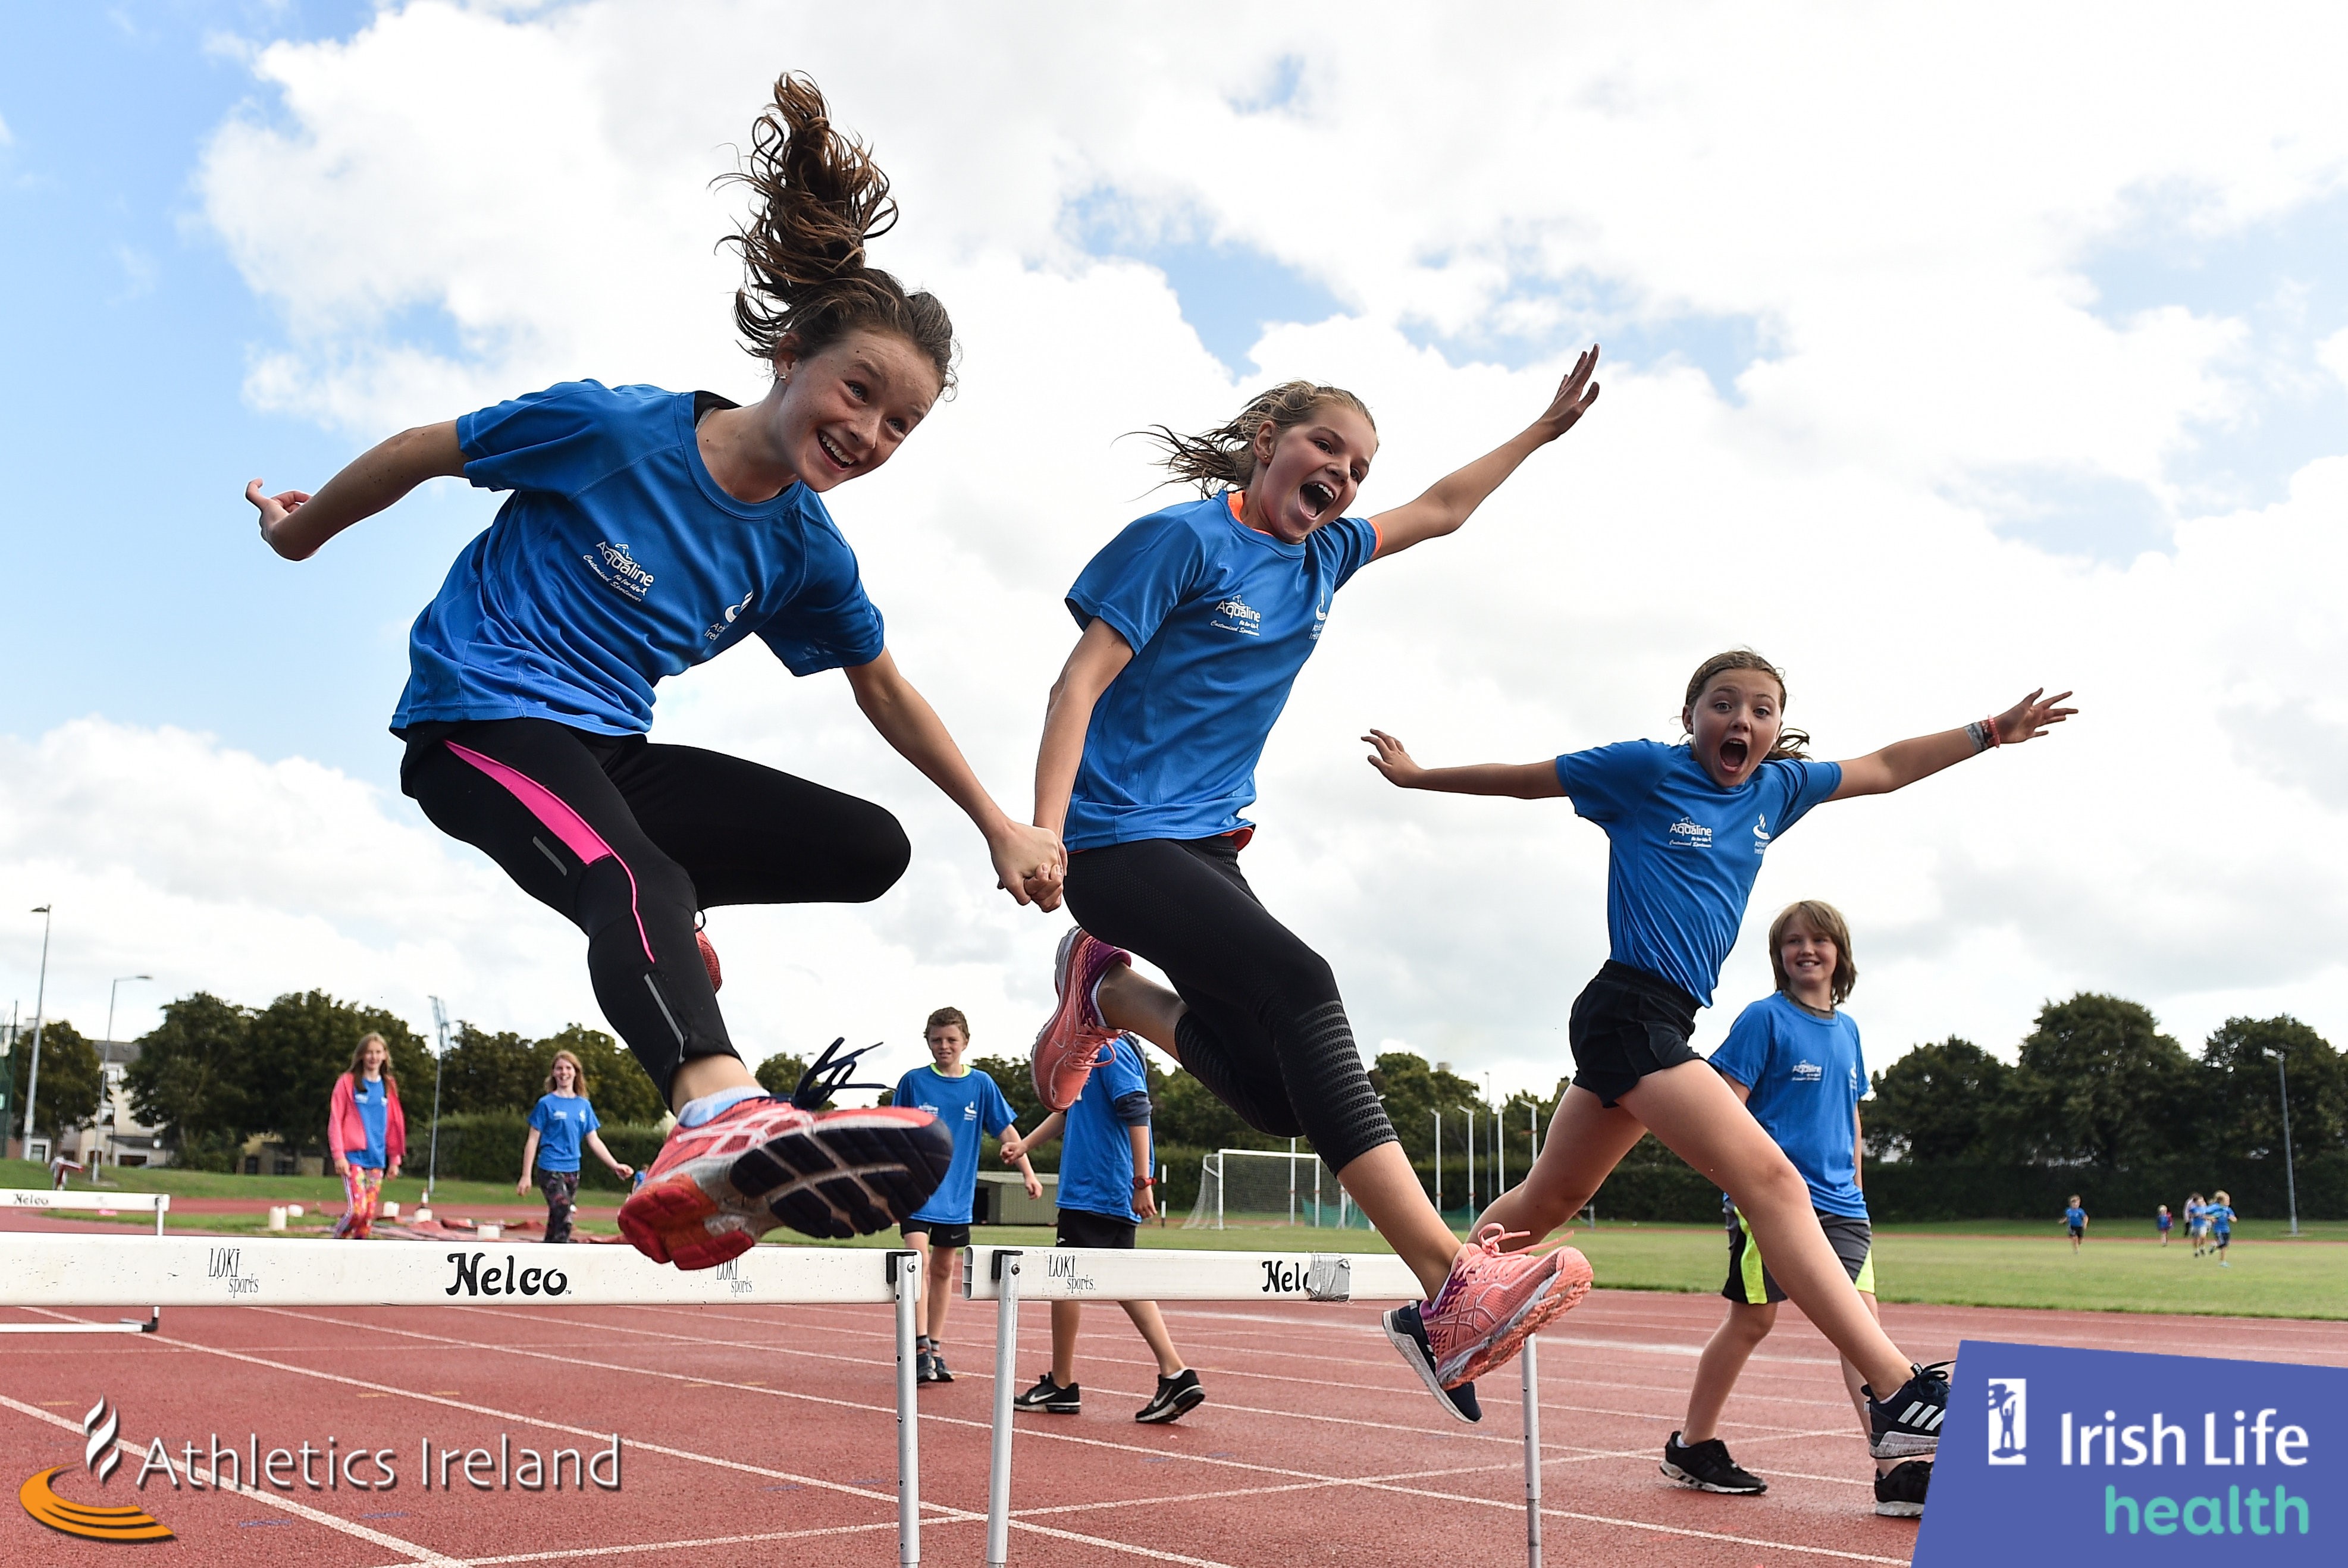 Host clubs wanted for 2019 Irish Life Health Summer Camp Programme